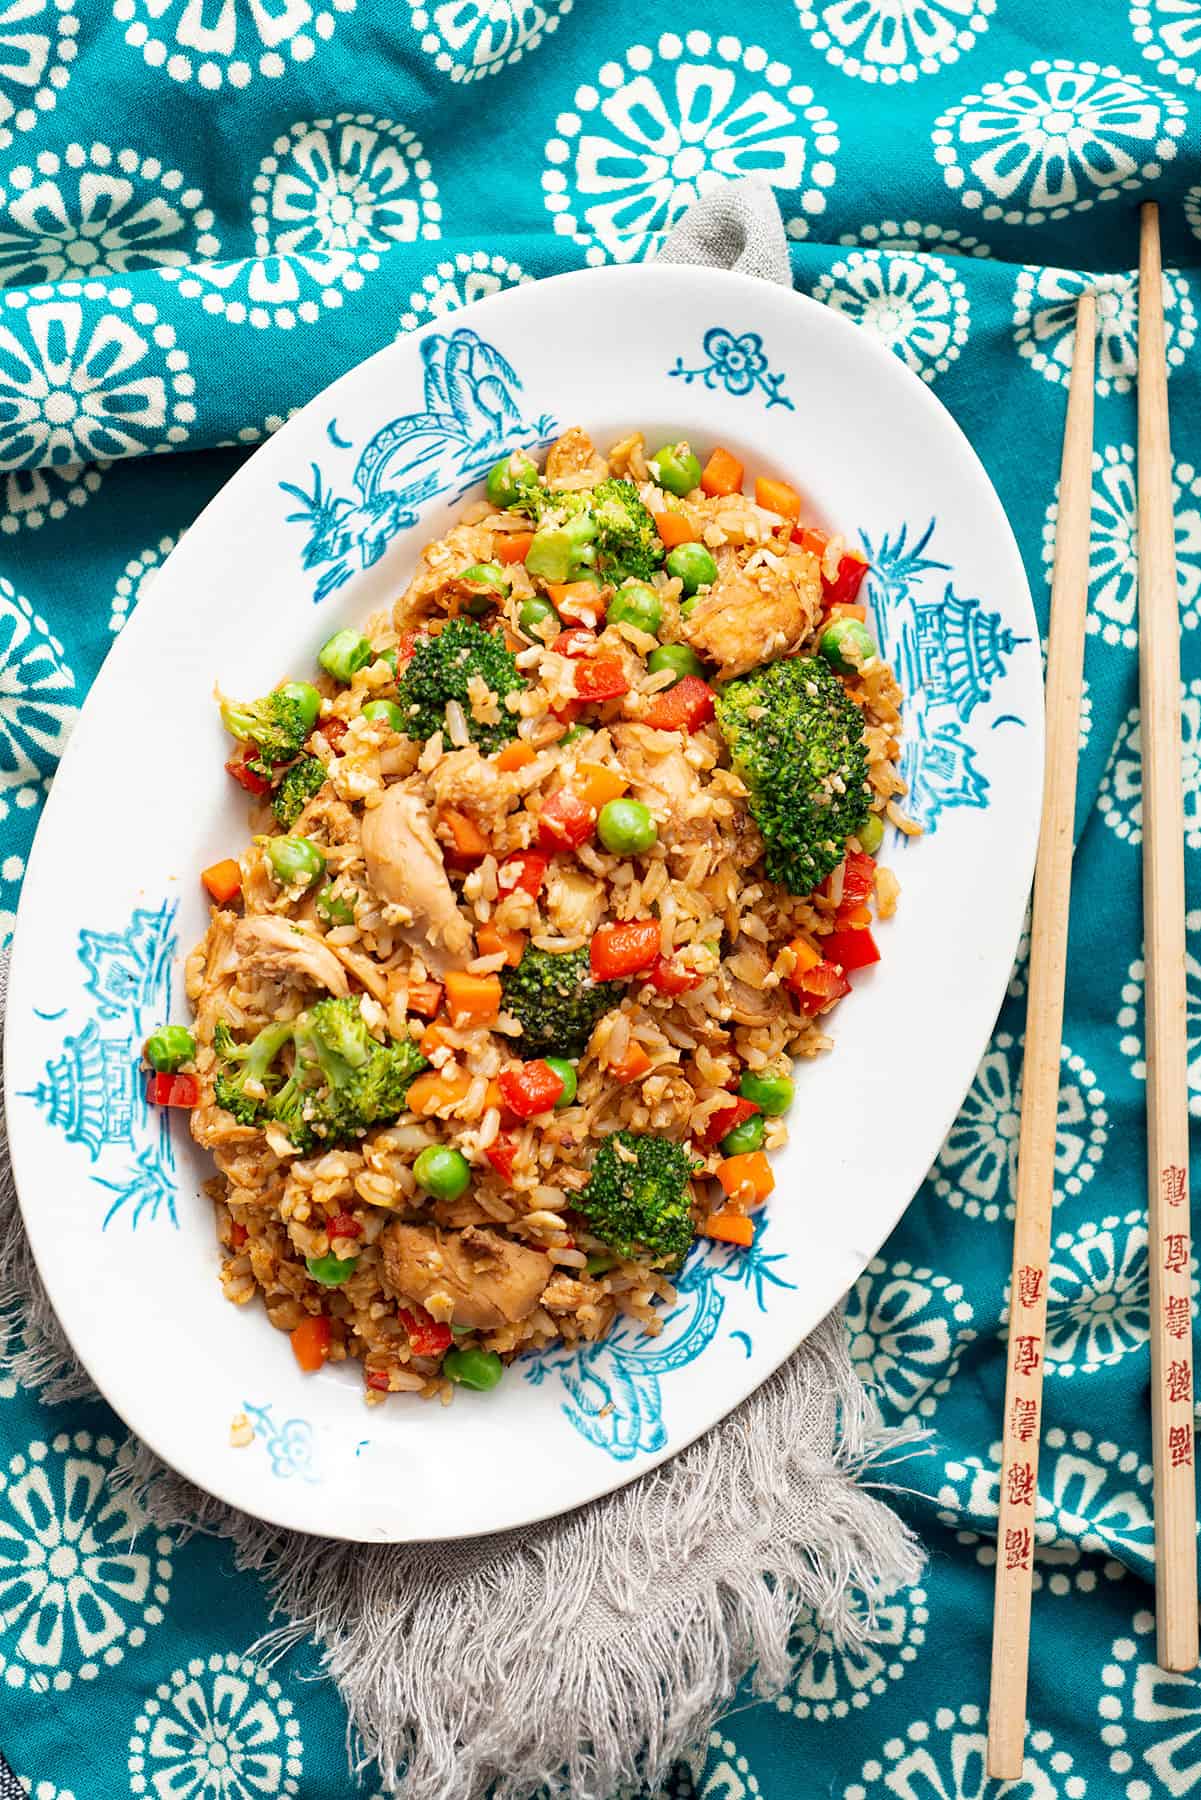 Chicken and brown rice stir fry.